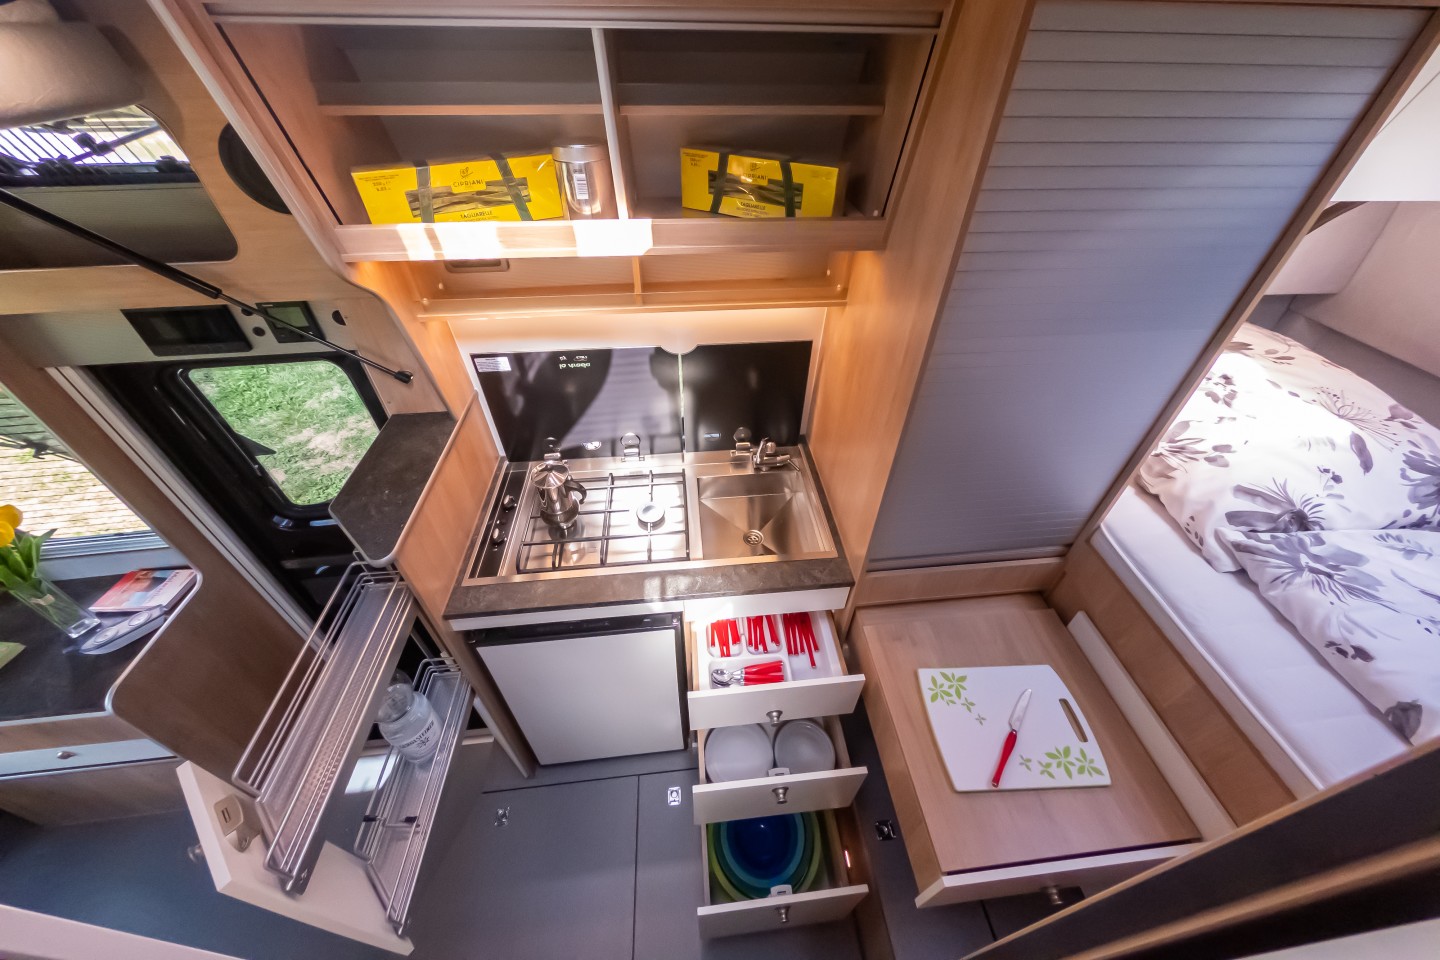 A look at the kitchen and its various drawers and slides